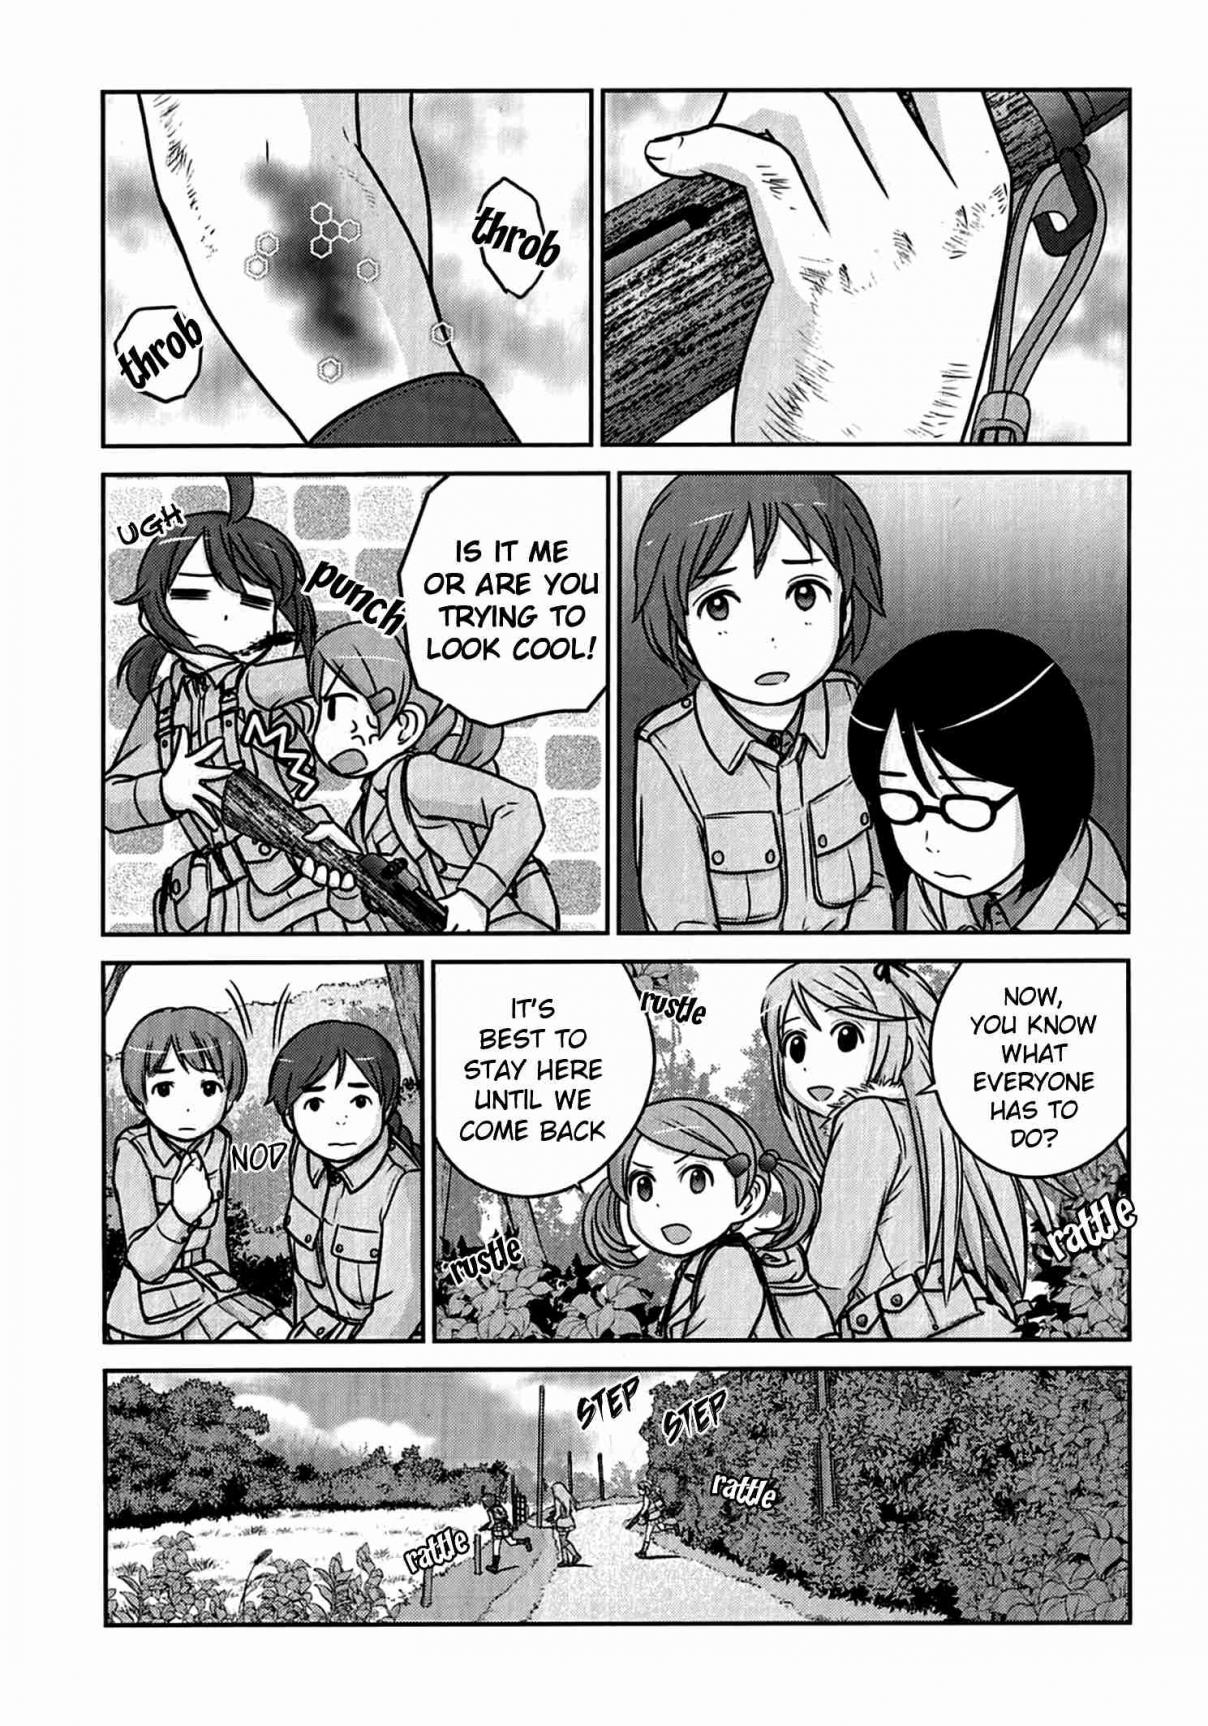 Official Test Manga Vol. 2 Ch. 5 Far Away! The search for the Two girls